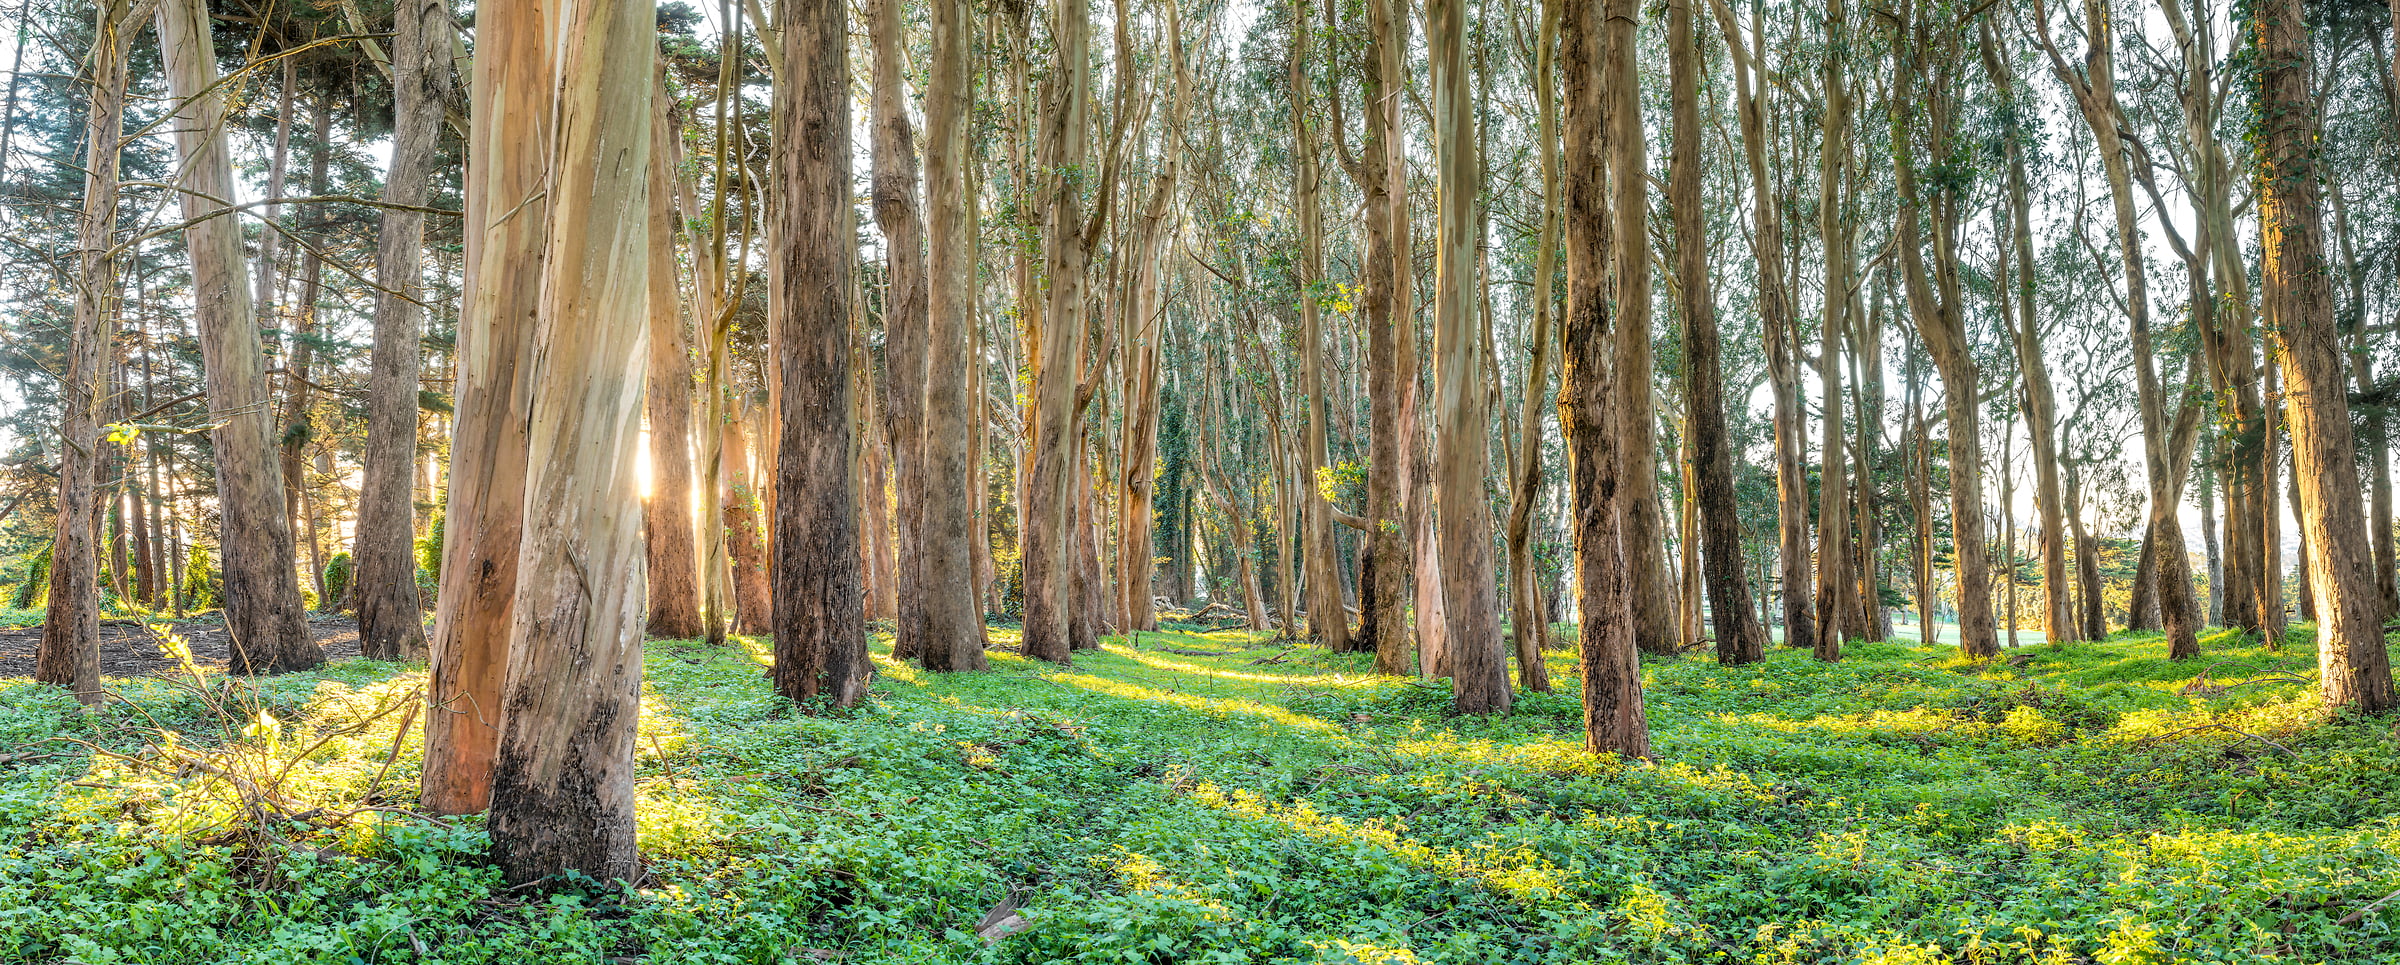 369 megapixels! A very high resolution, large-format VAST photo print of eucalyptus trees in the Presidio of San Francisco; fine art nature photo created by Justin Katz in California.